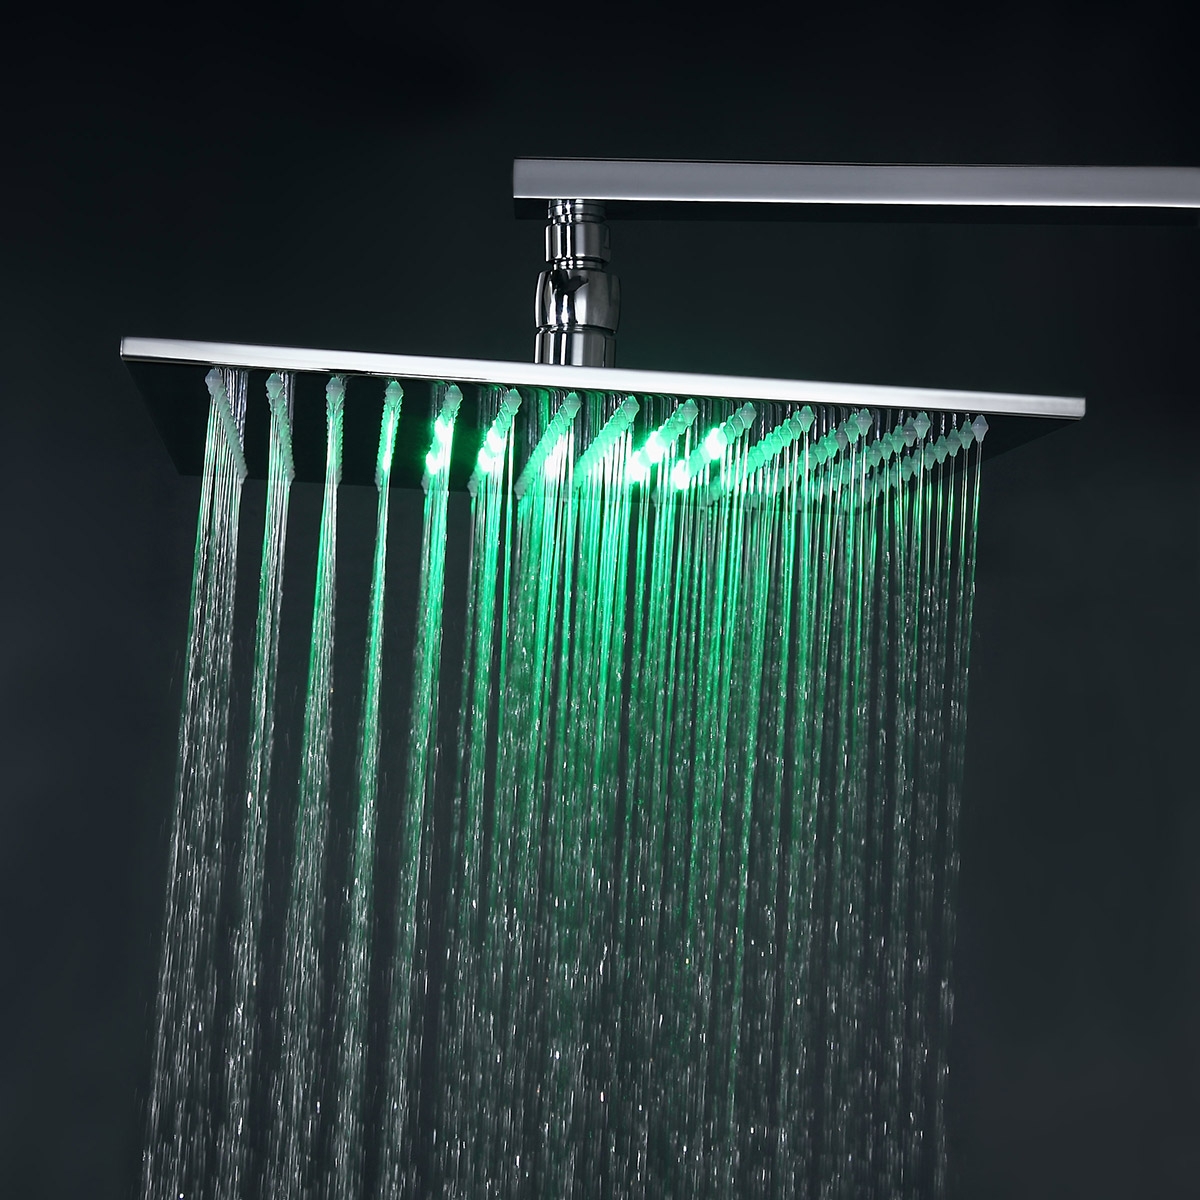 Modern LED Wall Mount 12" Rain Head with Hanshower & Body Spray Jets Thermostatic Shower Set in Polished Chrome Solid Brass